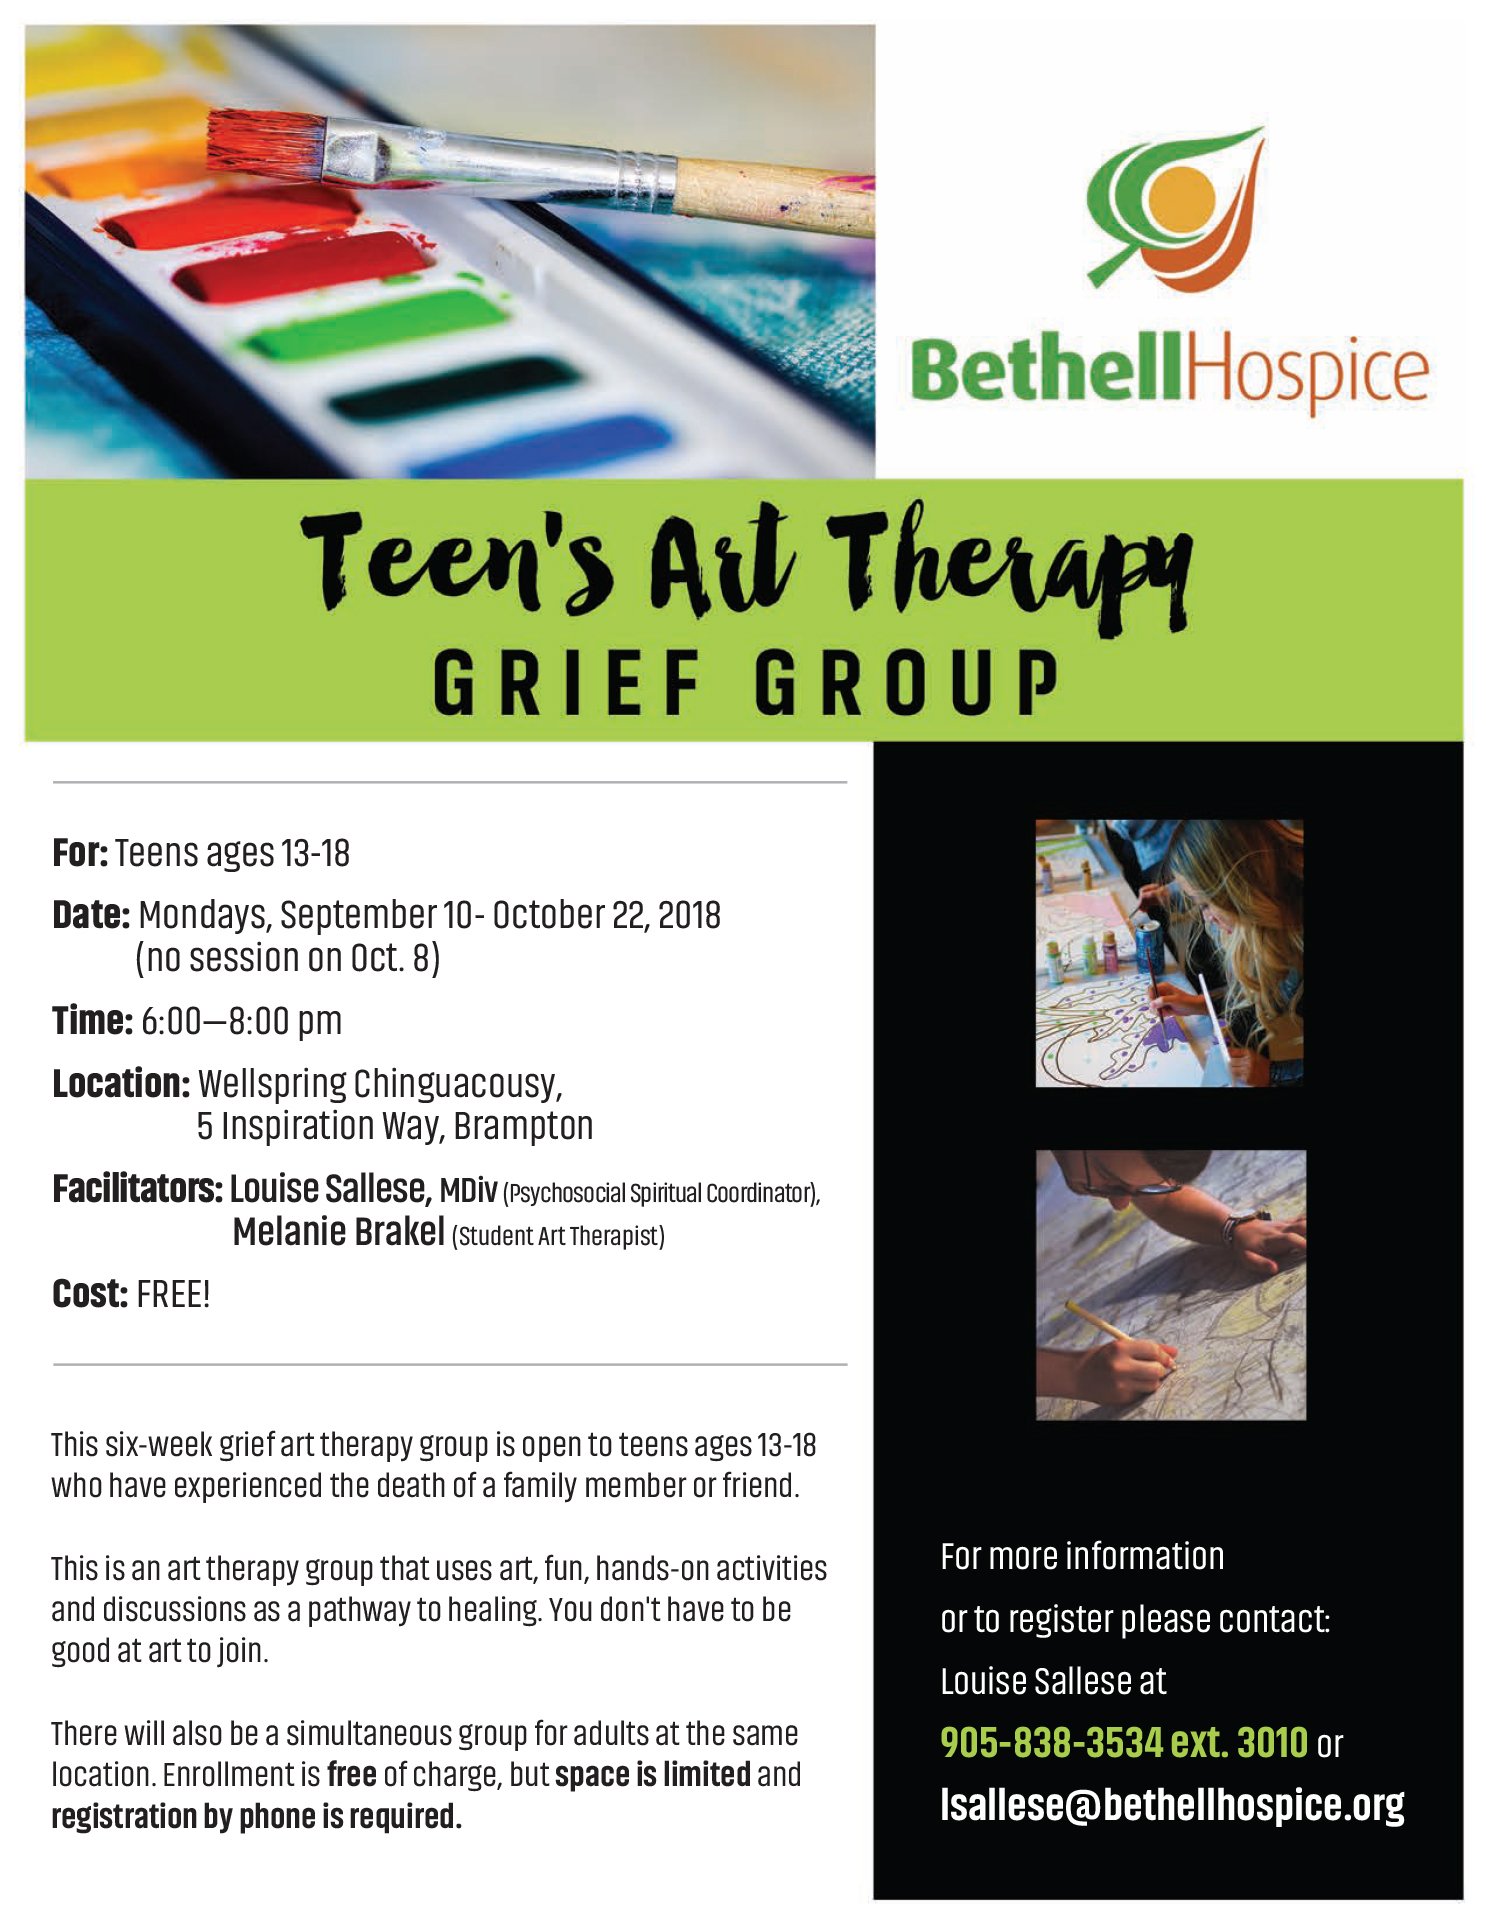 Bethellhospice Teens Art Therapy Grief Group Begins September 10 For Six Weeks Registration Is Free But Space Is Limited Call Louise Sallese At 905 8 3534 Ext 3010 For More Information Or